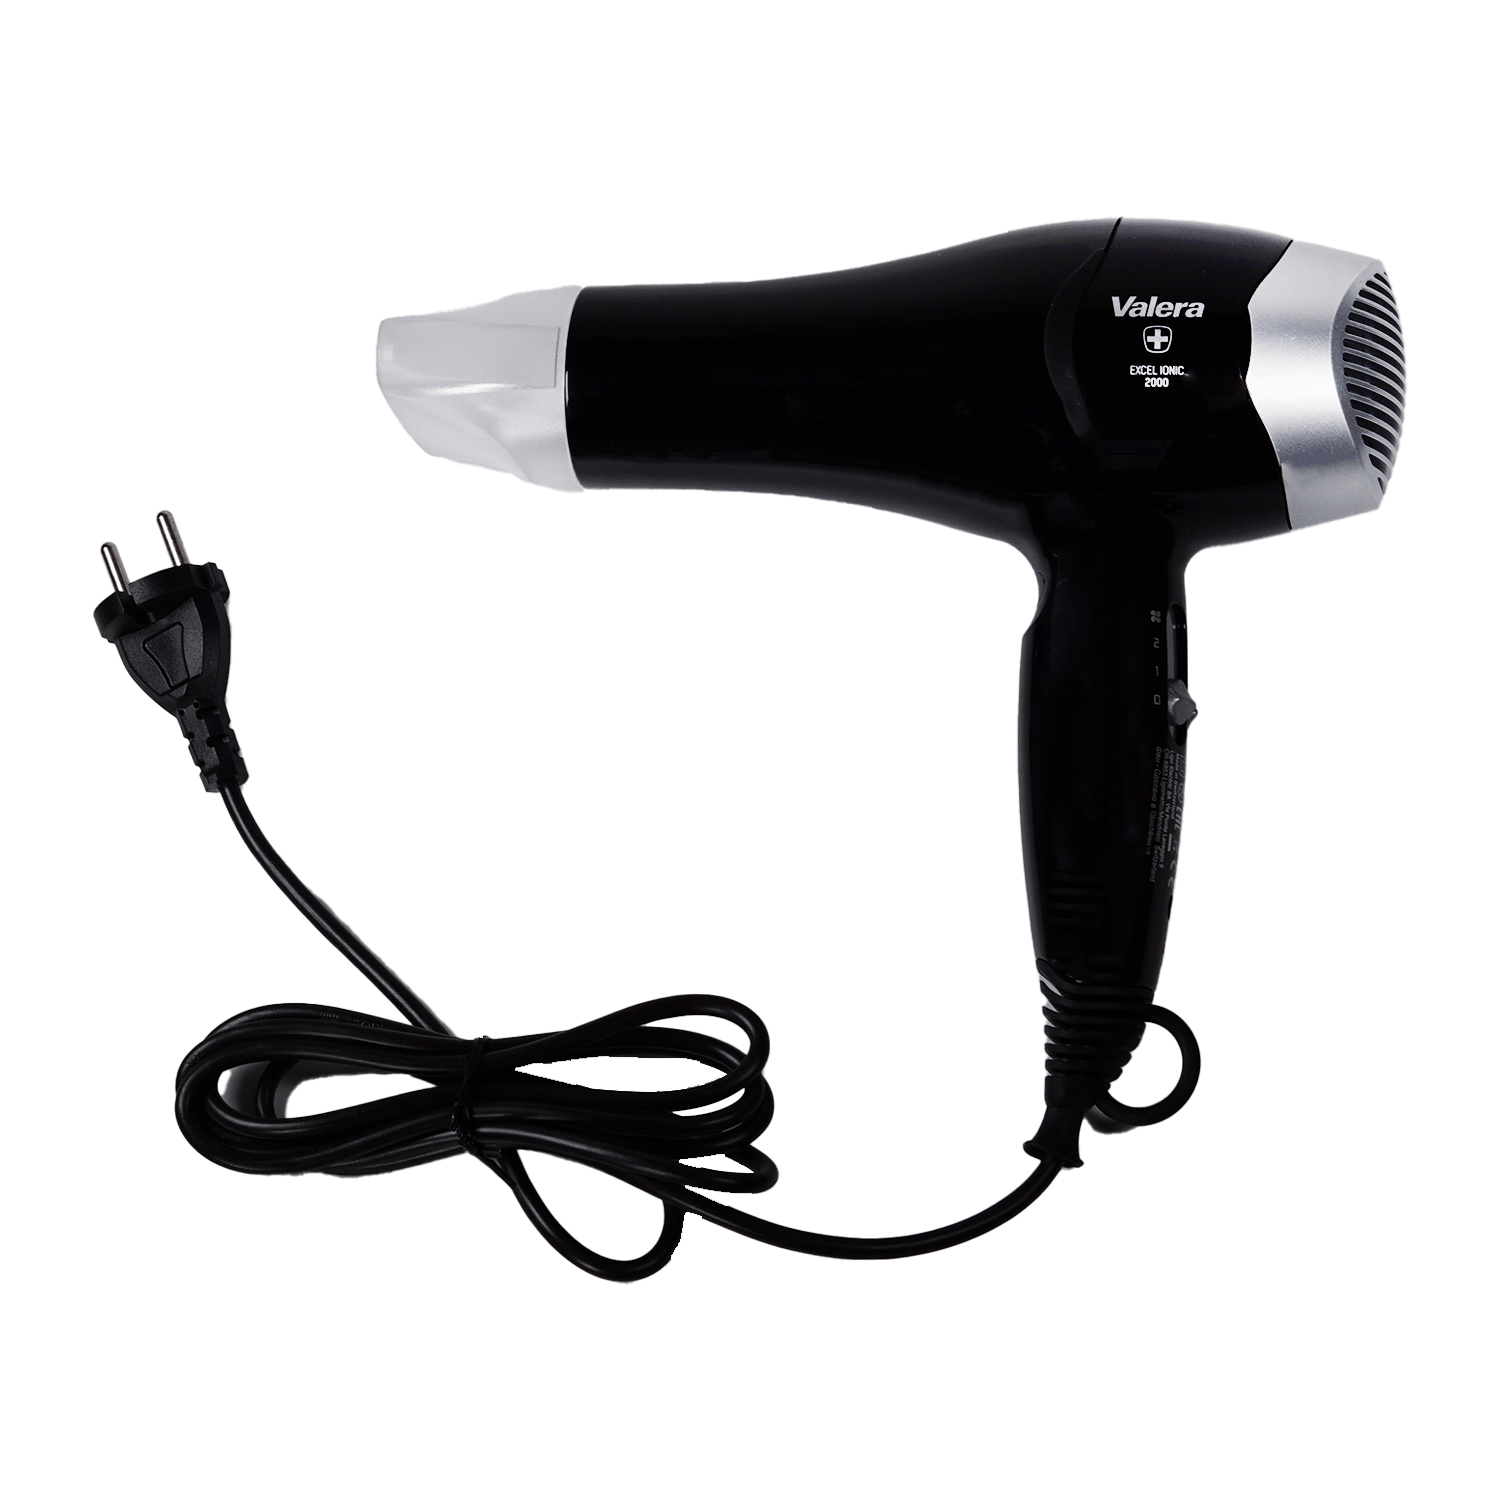 Hair dryer Excel Ionic 2000 W